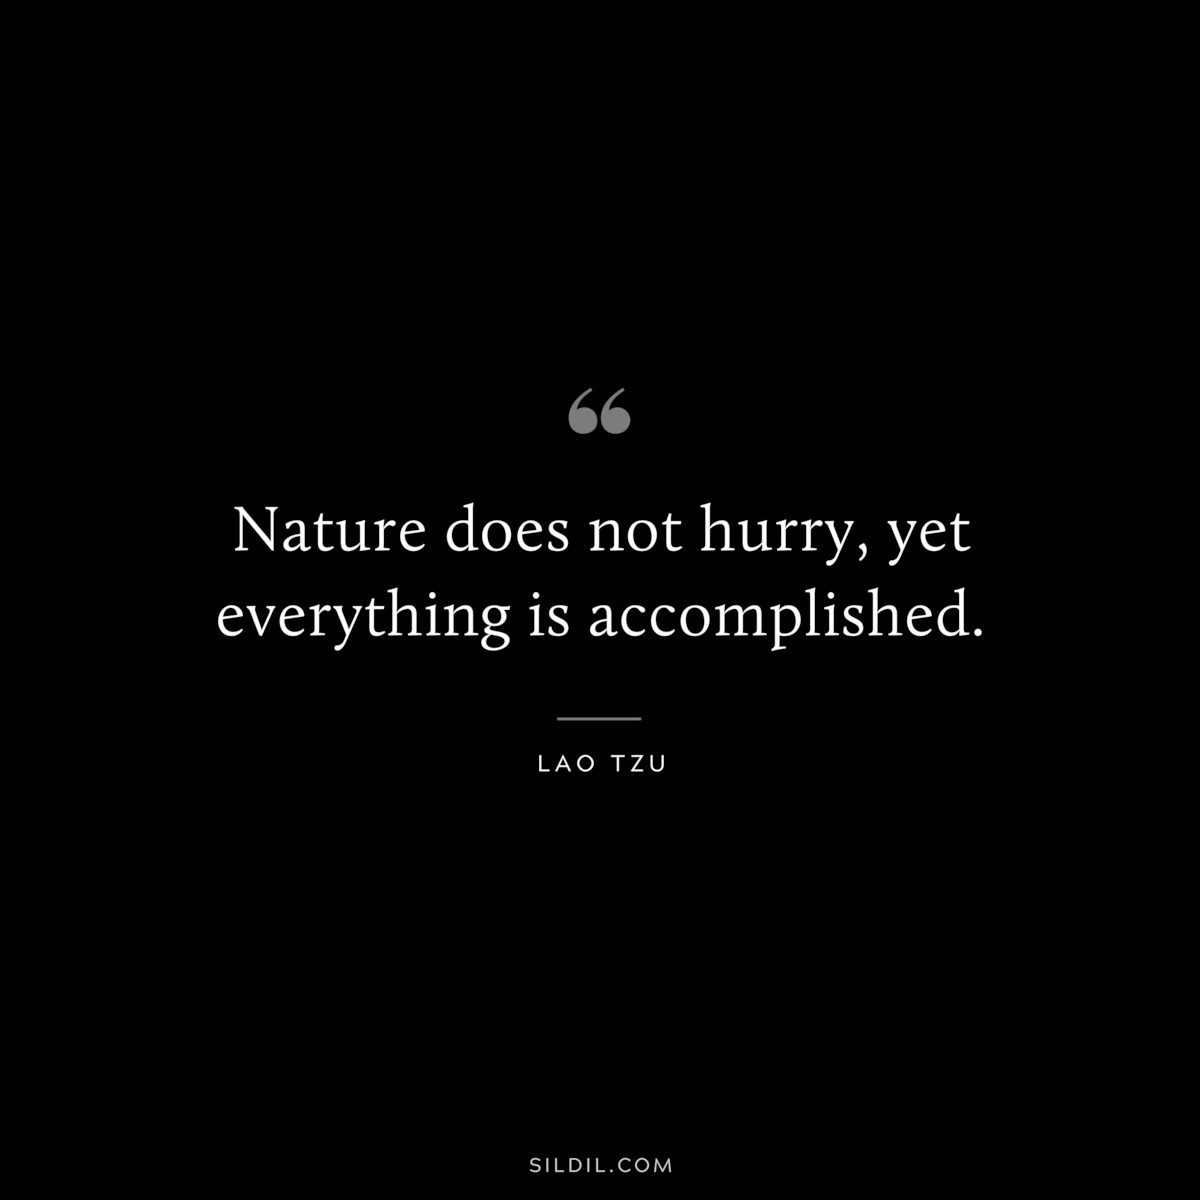 Nature does not hurry, yet everything is accomplished. ― Lao Tzu